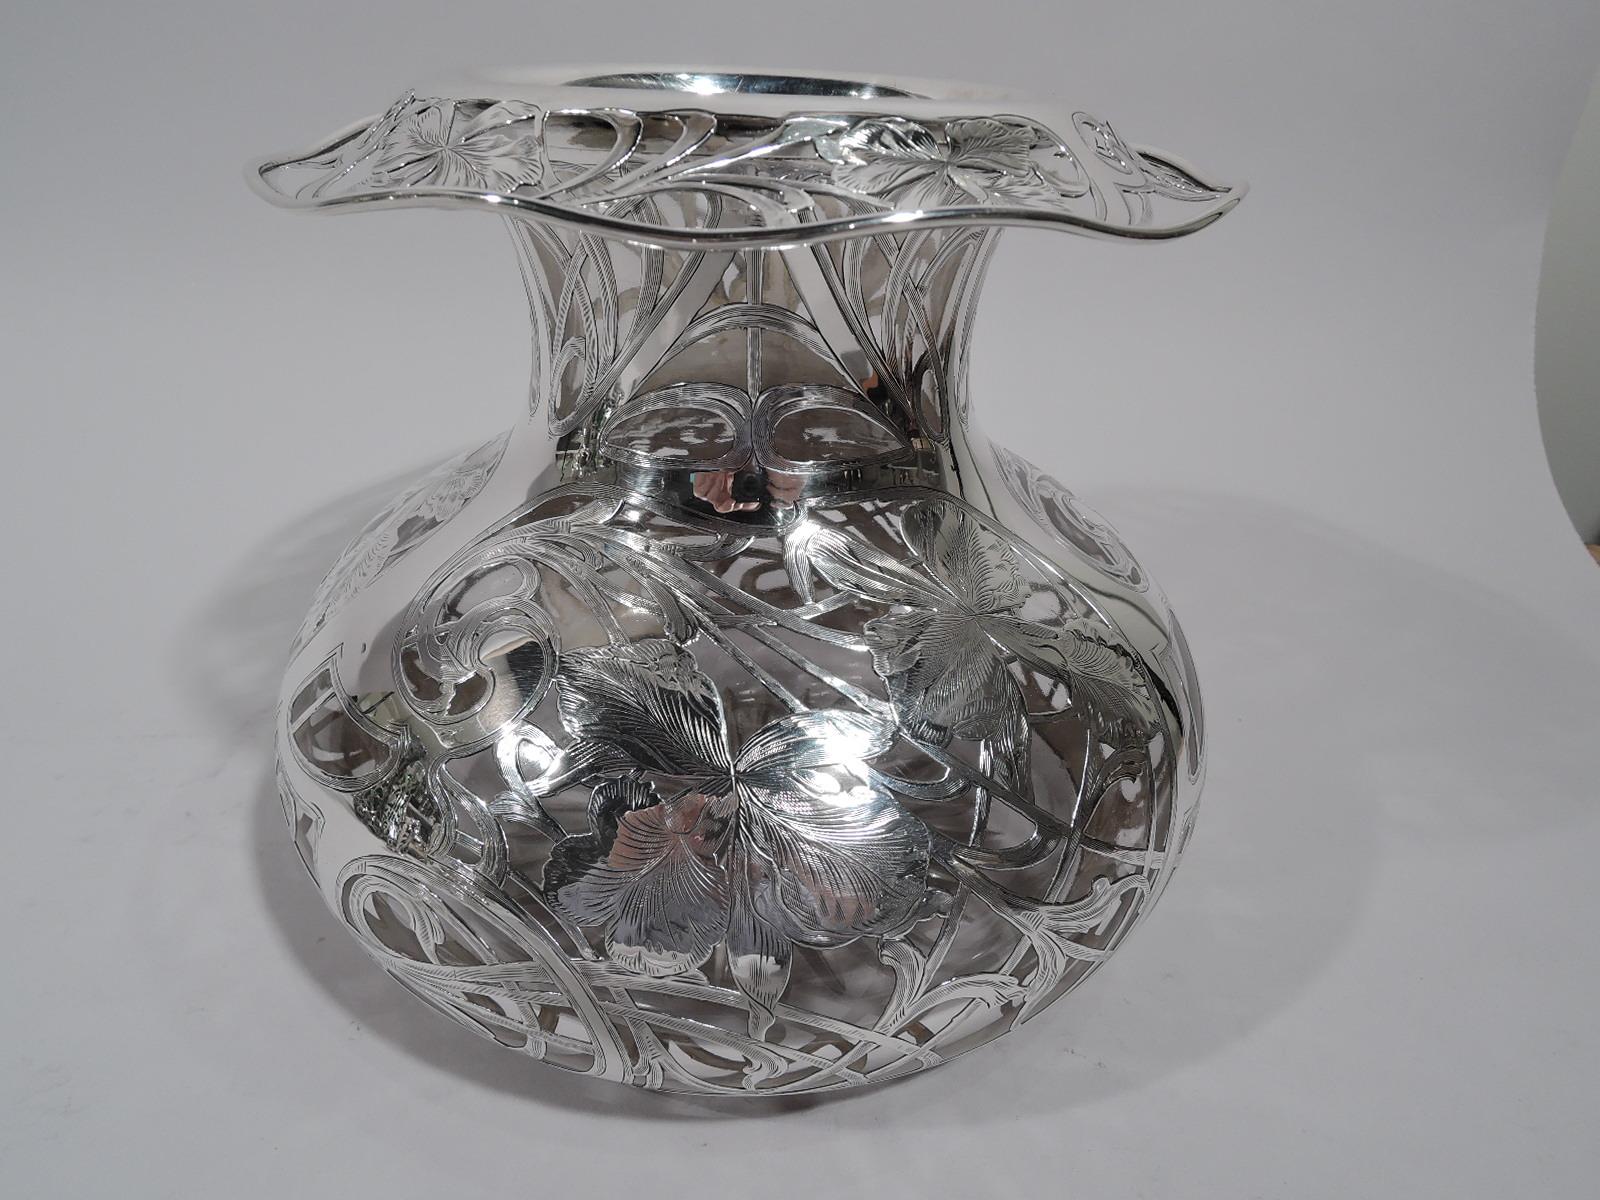 Turn of the century Art Nouveau glass vase with engraved silver overlay. Bellied bowl with short neck and open and wavy turned-down rim. Overlay in form of loose flower heads and entwined and whiplash tendrils. Rim ornament same. Dense and dramatic.